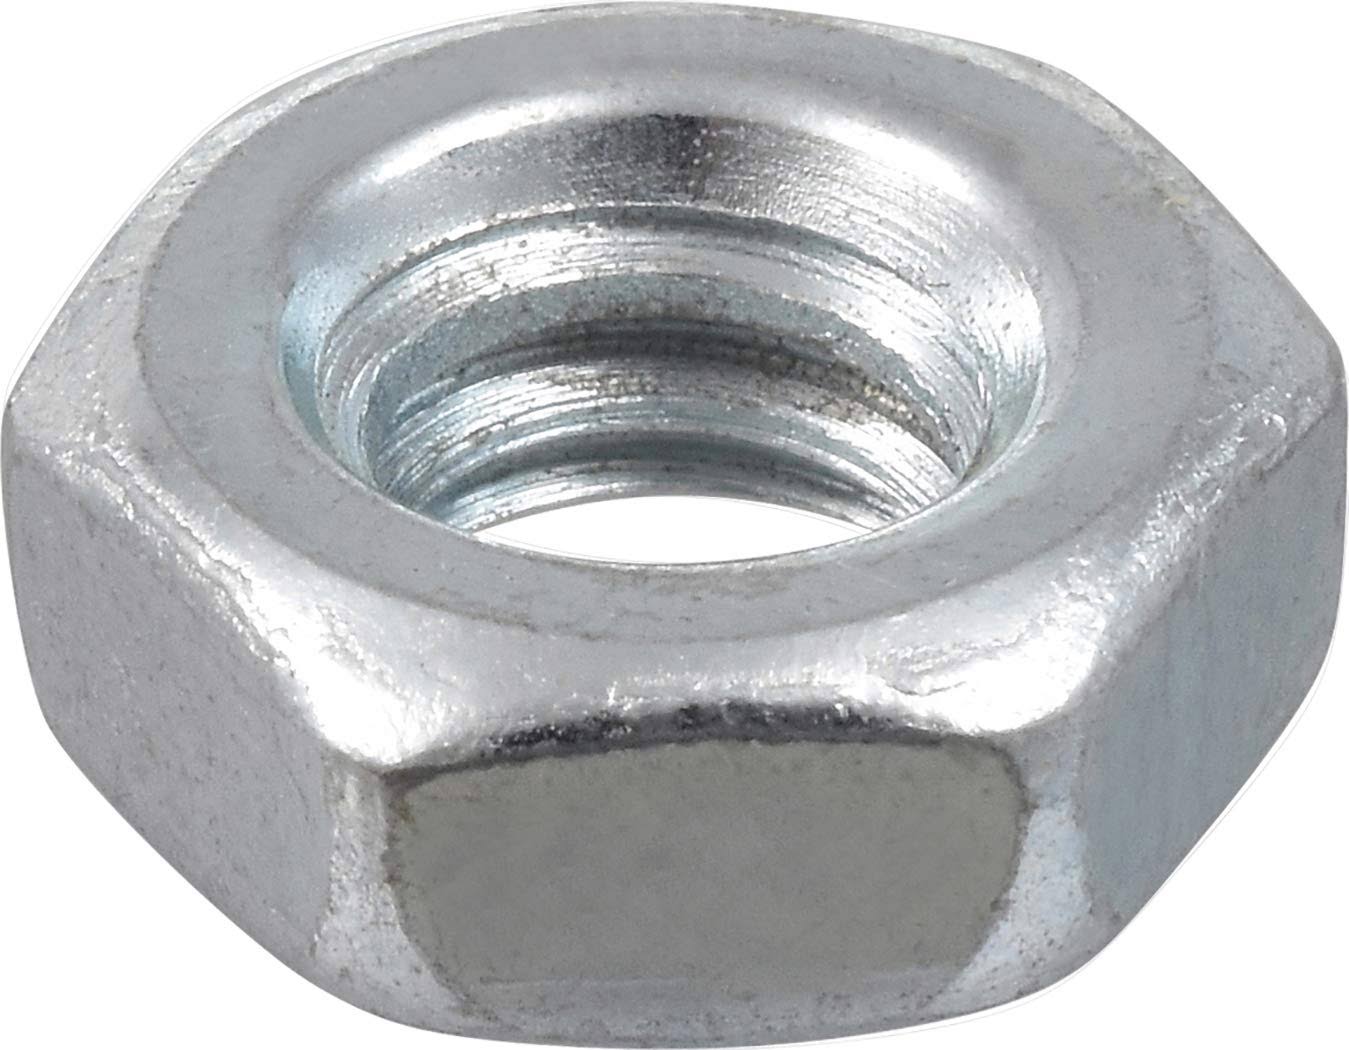 The Hillman Group Standard Hex Nuts - 100ct, #10-24 Zinc Plated